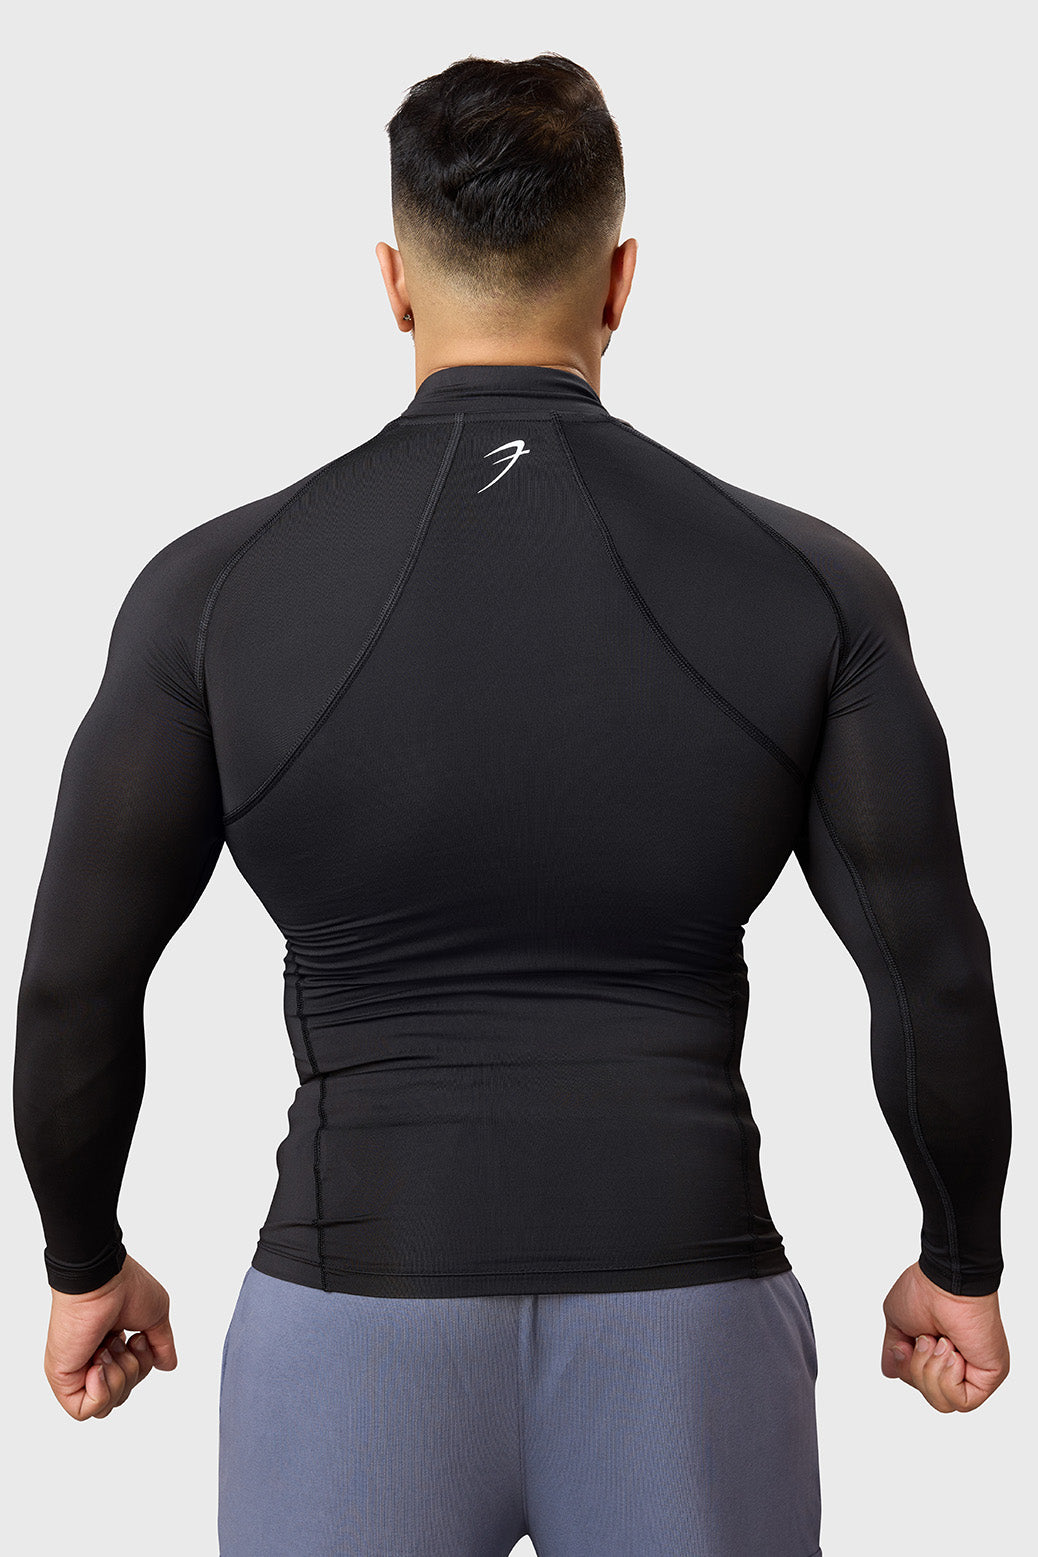 High Neck Compression Full Sleeves T-shirt Black